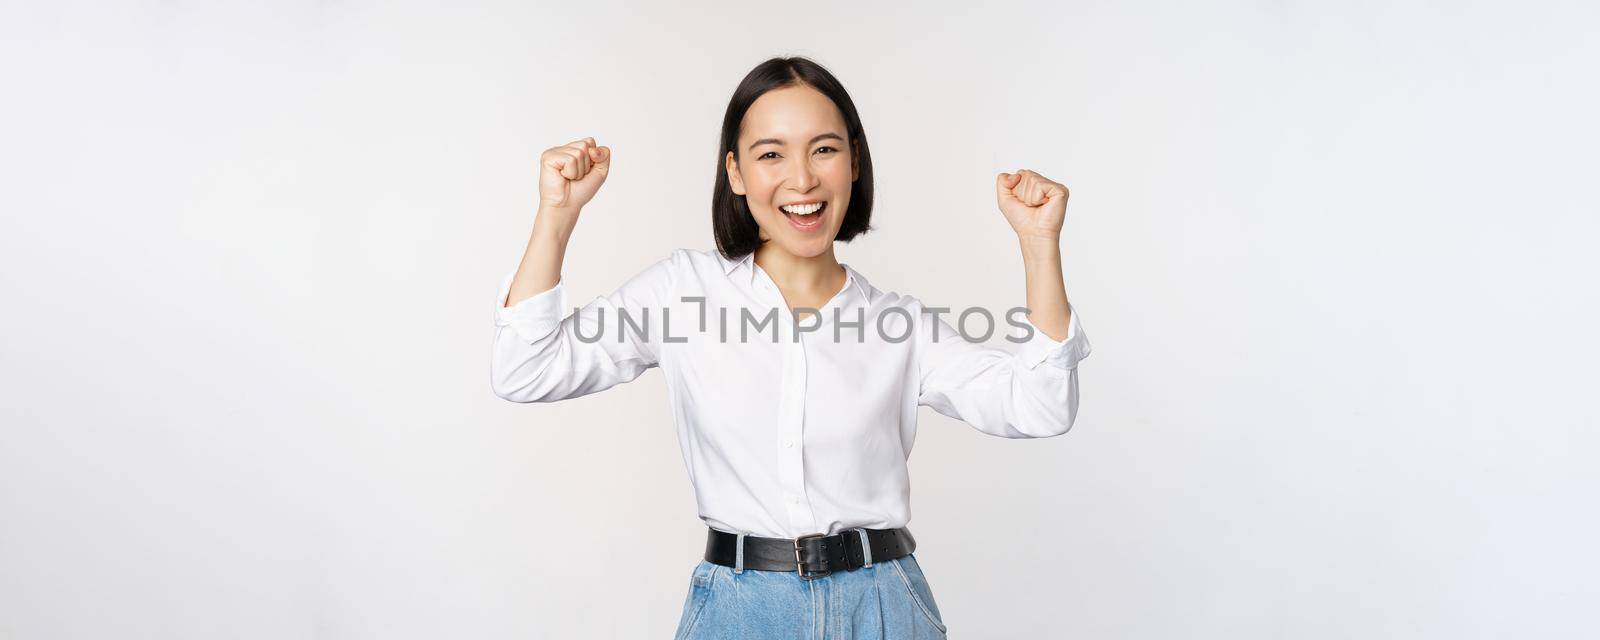 Enthusiastic asian woman rejoicing, say yes, looking happy and celebrating victory, champion dance, fist pump gesture, standing over white background.